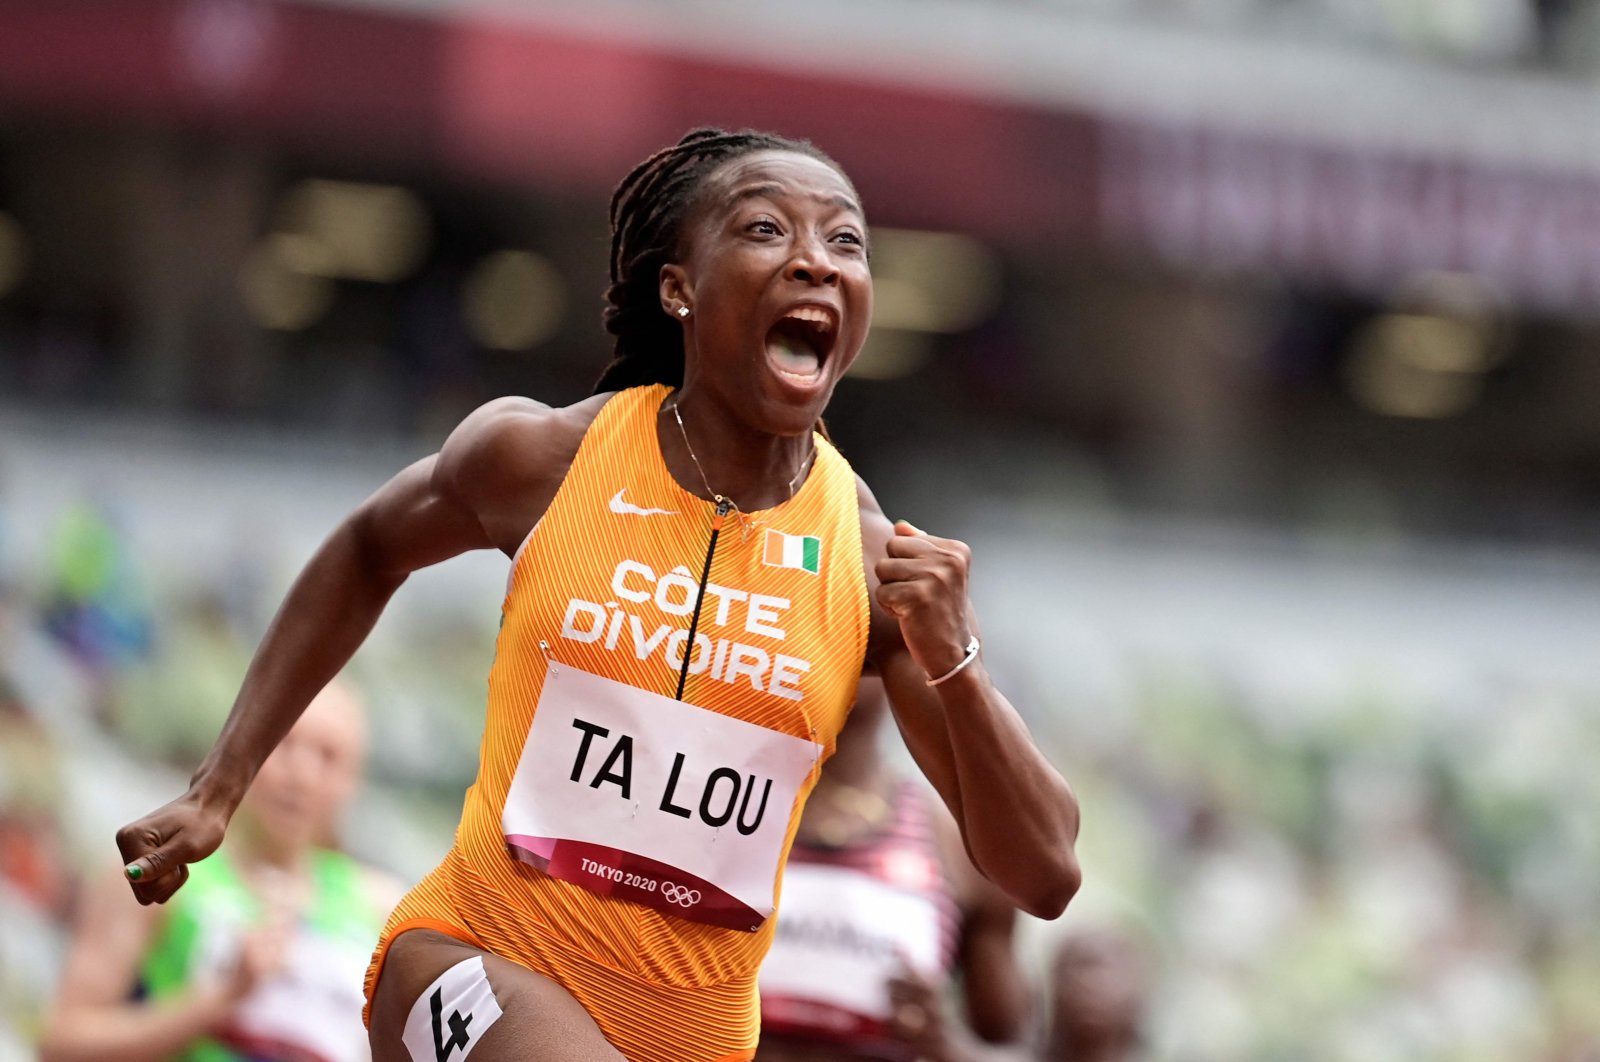 Marie-Josee Ta Lou, of the Ivory Coast, wins a heat in the women's 100-meter run at the 2020 Summer Olympics, in Tokyo, Japan, July 30, 2021. (AFP Photo)